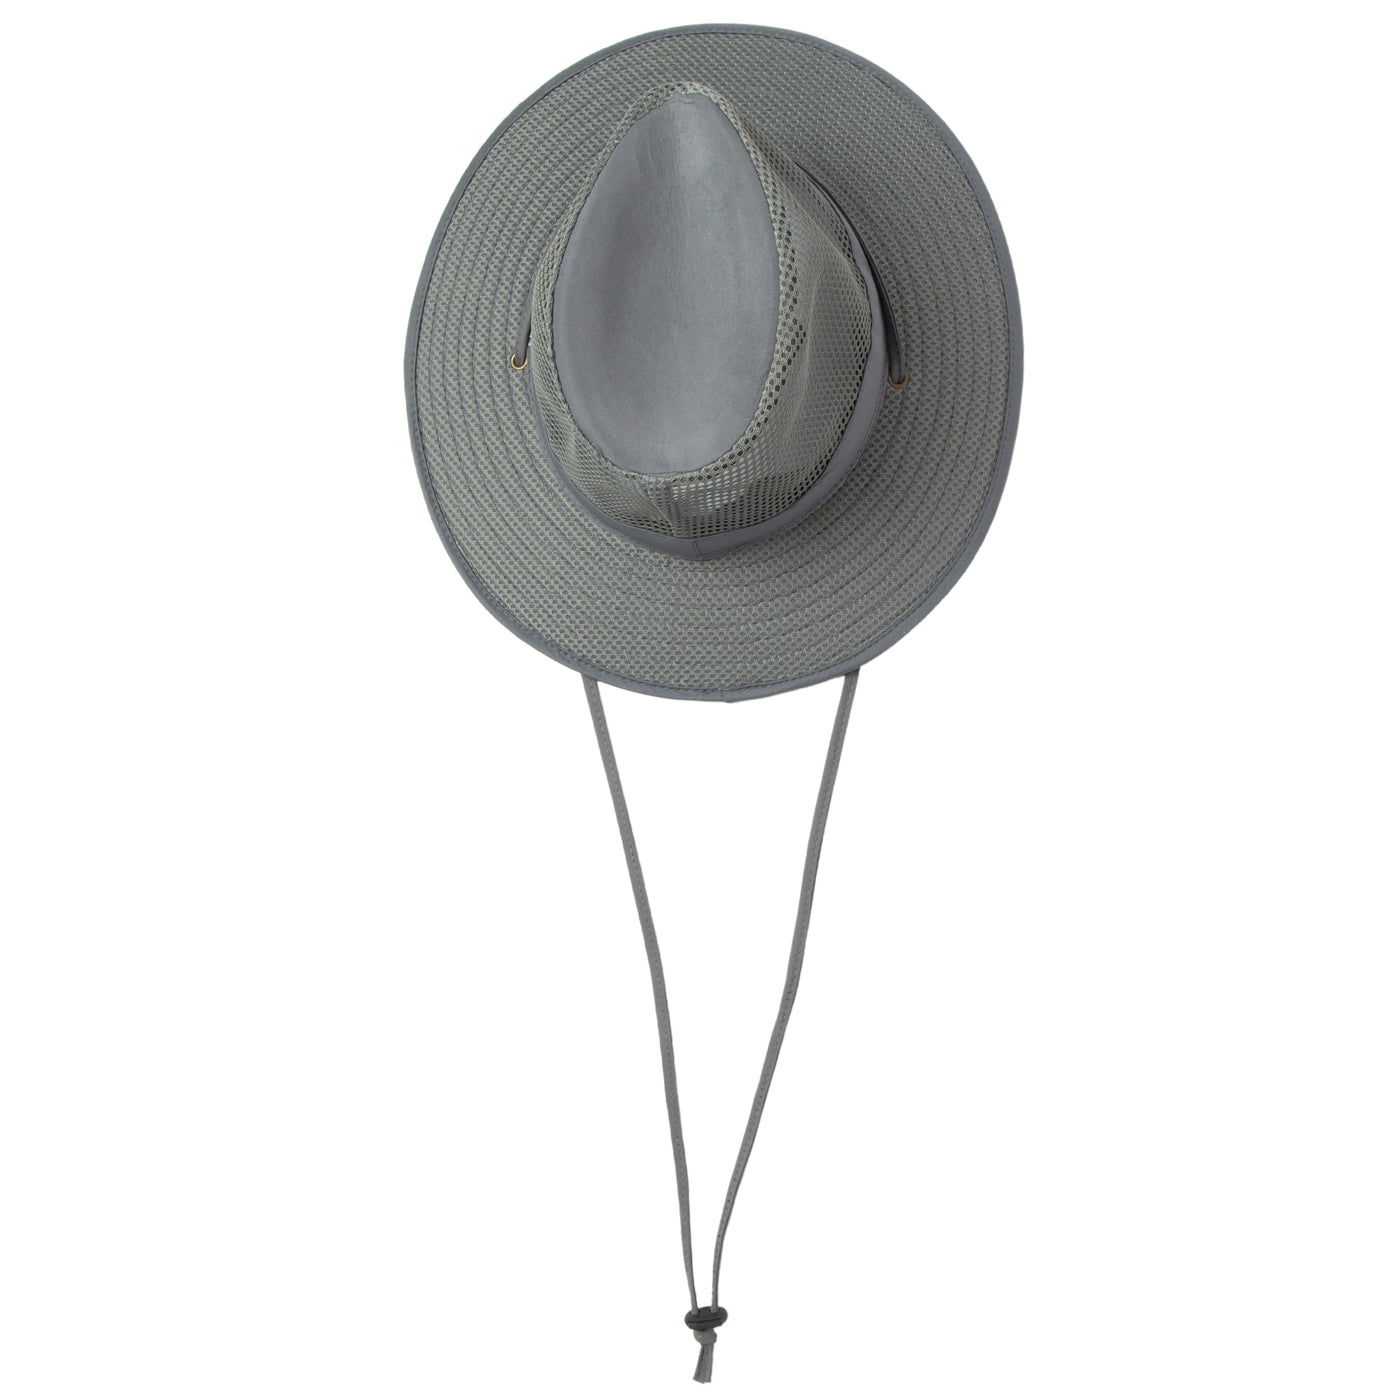 Hang Ten - Fedora Hat with Ventilated Crown and Chin Cord-FEDORA-San Diego Hat Company